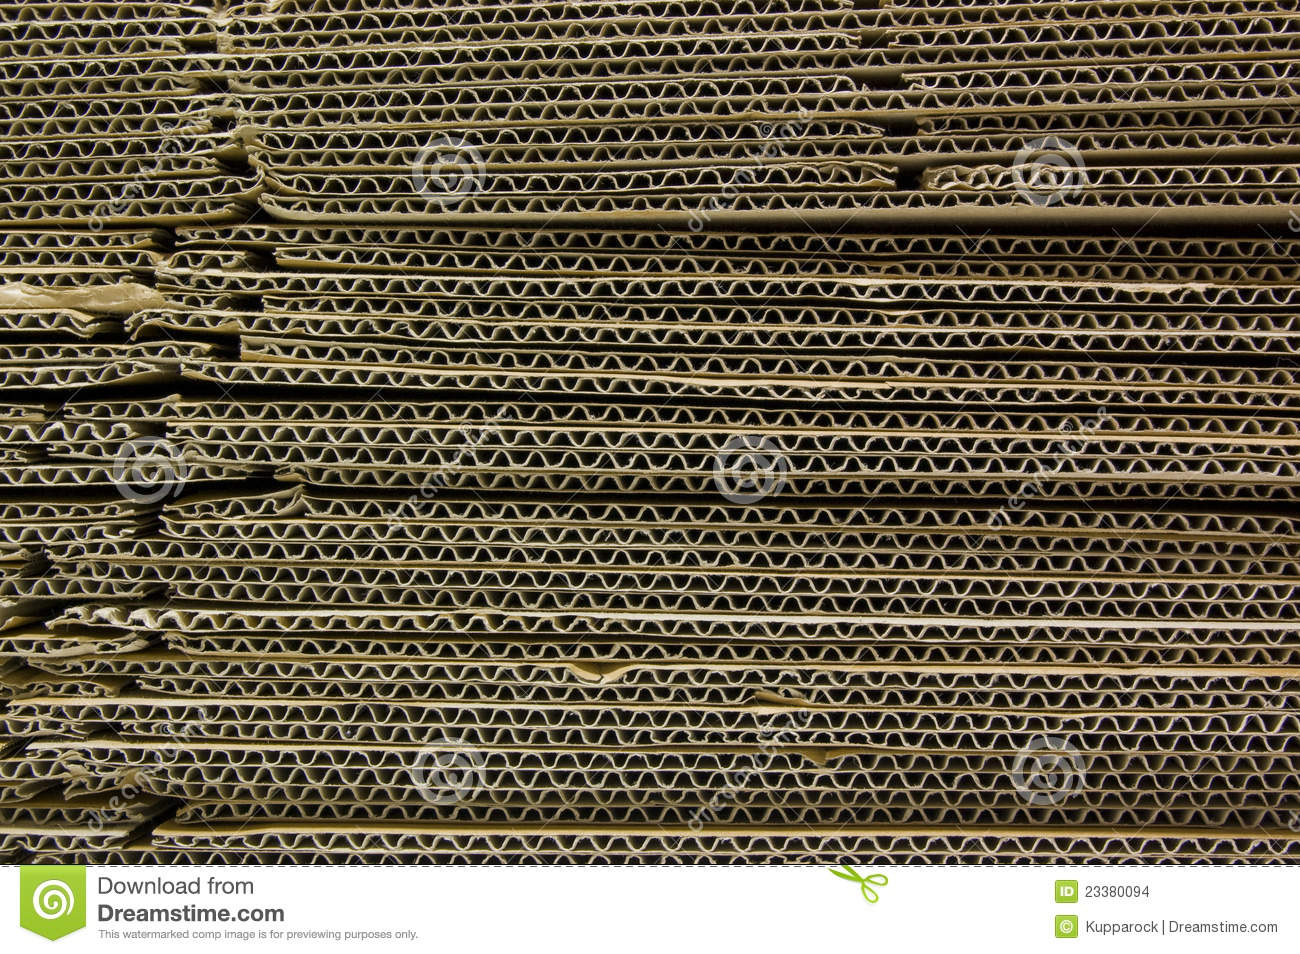 Pile Of Cardboard Boxes  Stock Images   Image  23380094